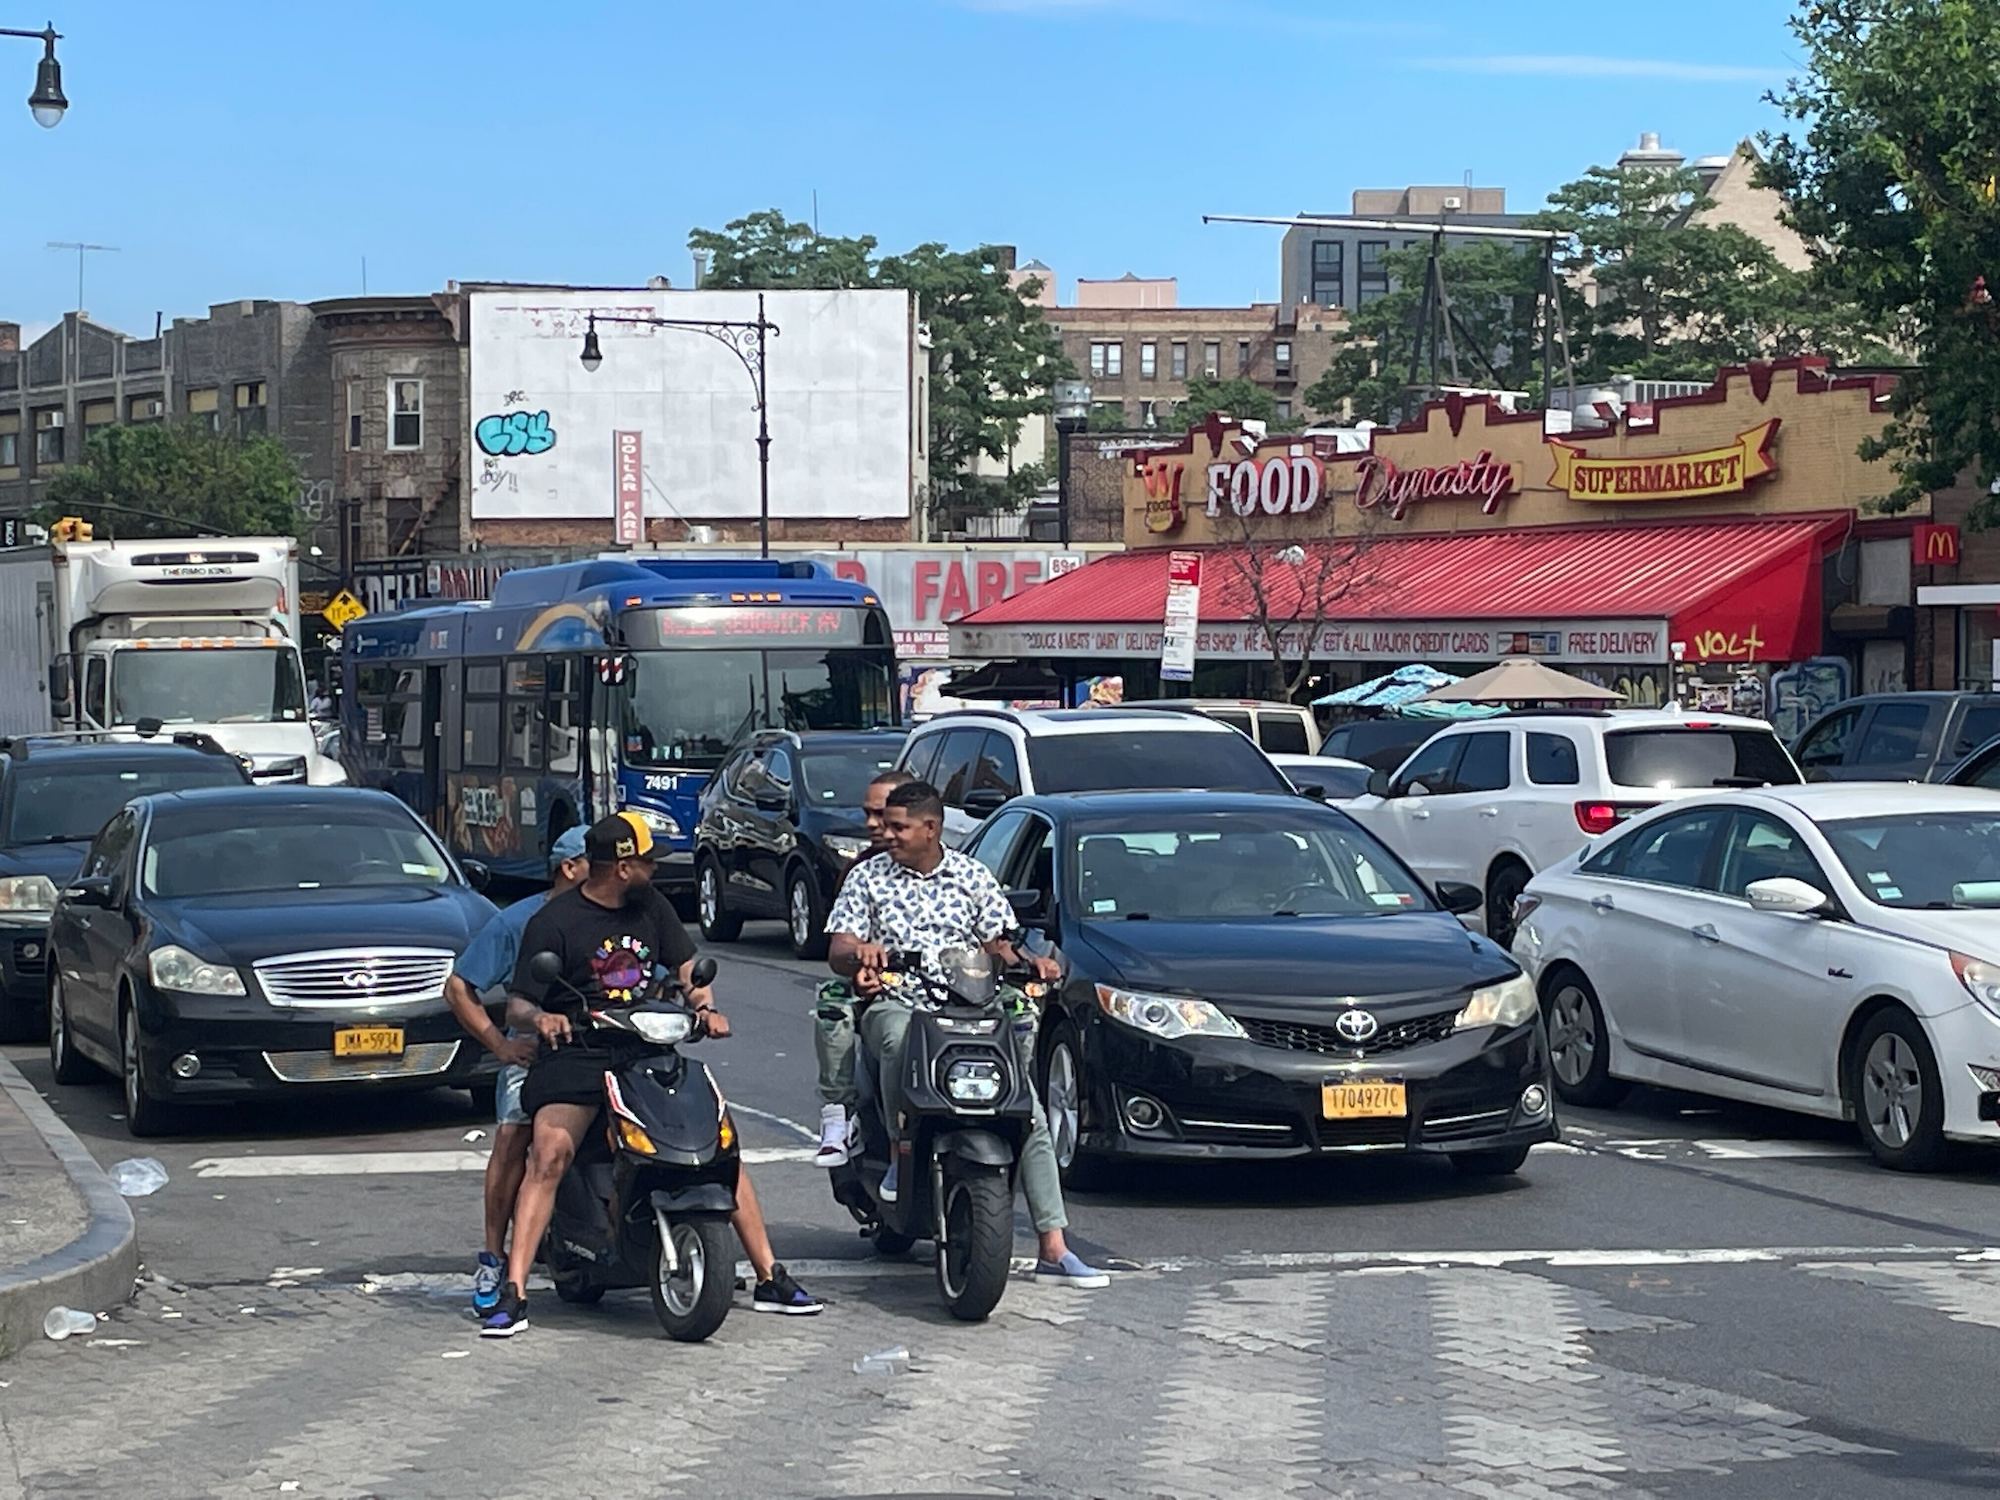 A BX12 Select Bus sits in traffic on Fordham Road.